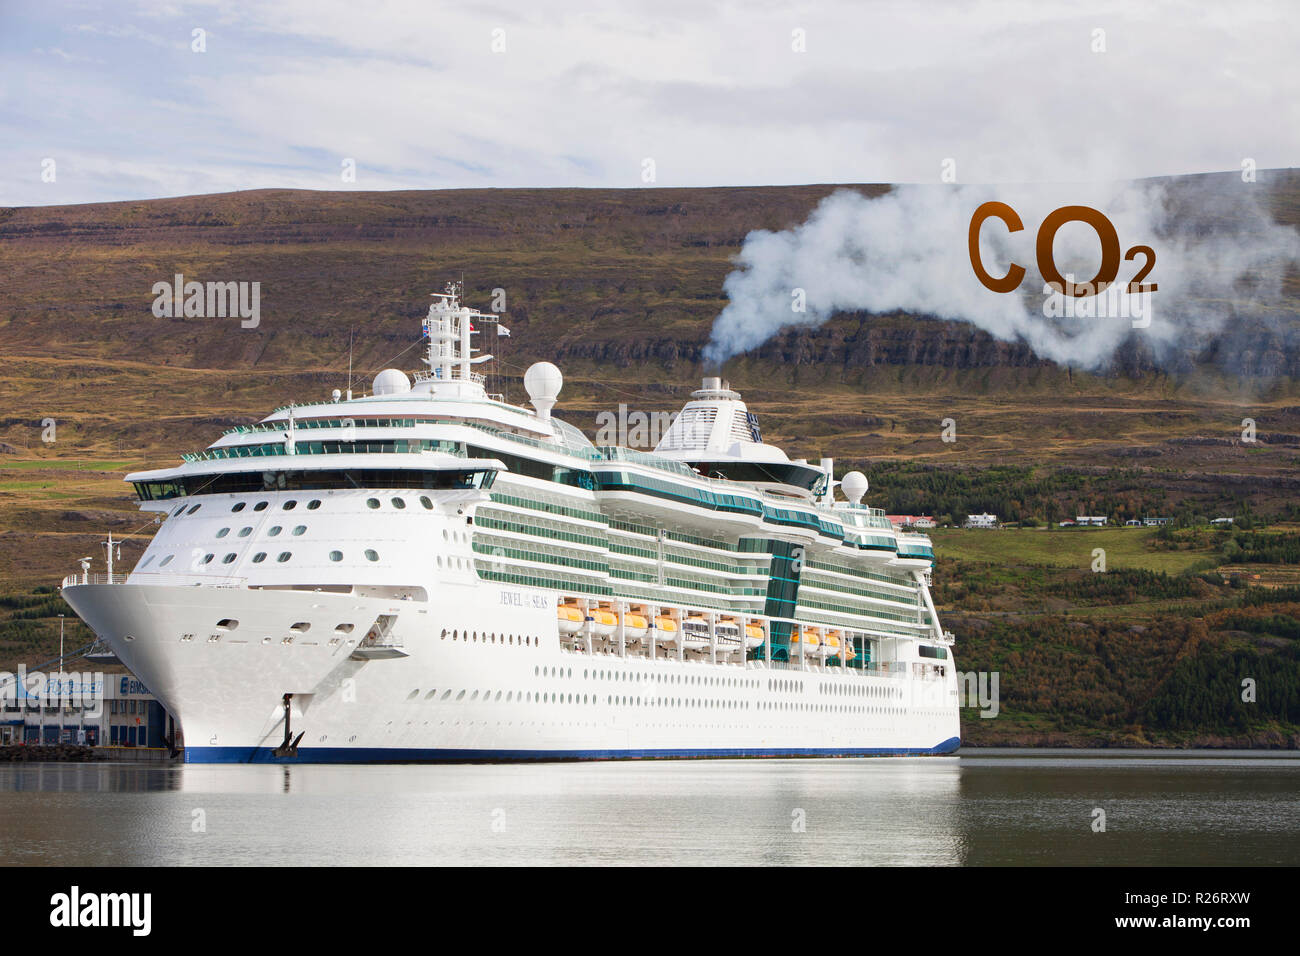 A massive cruise liner, The Jewel of the Seas, docked in Akureyri, and pouring out exhaust fumes Stock Photo